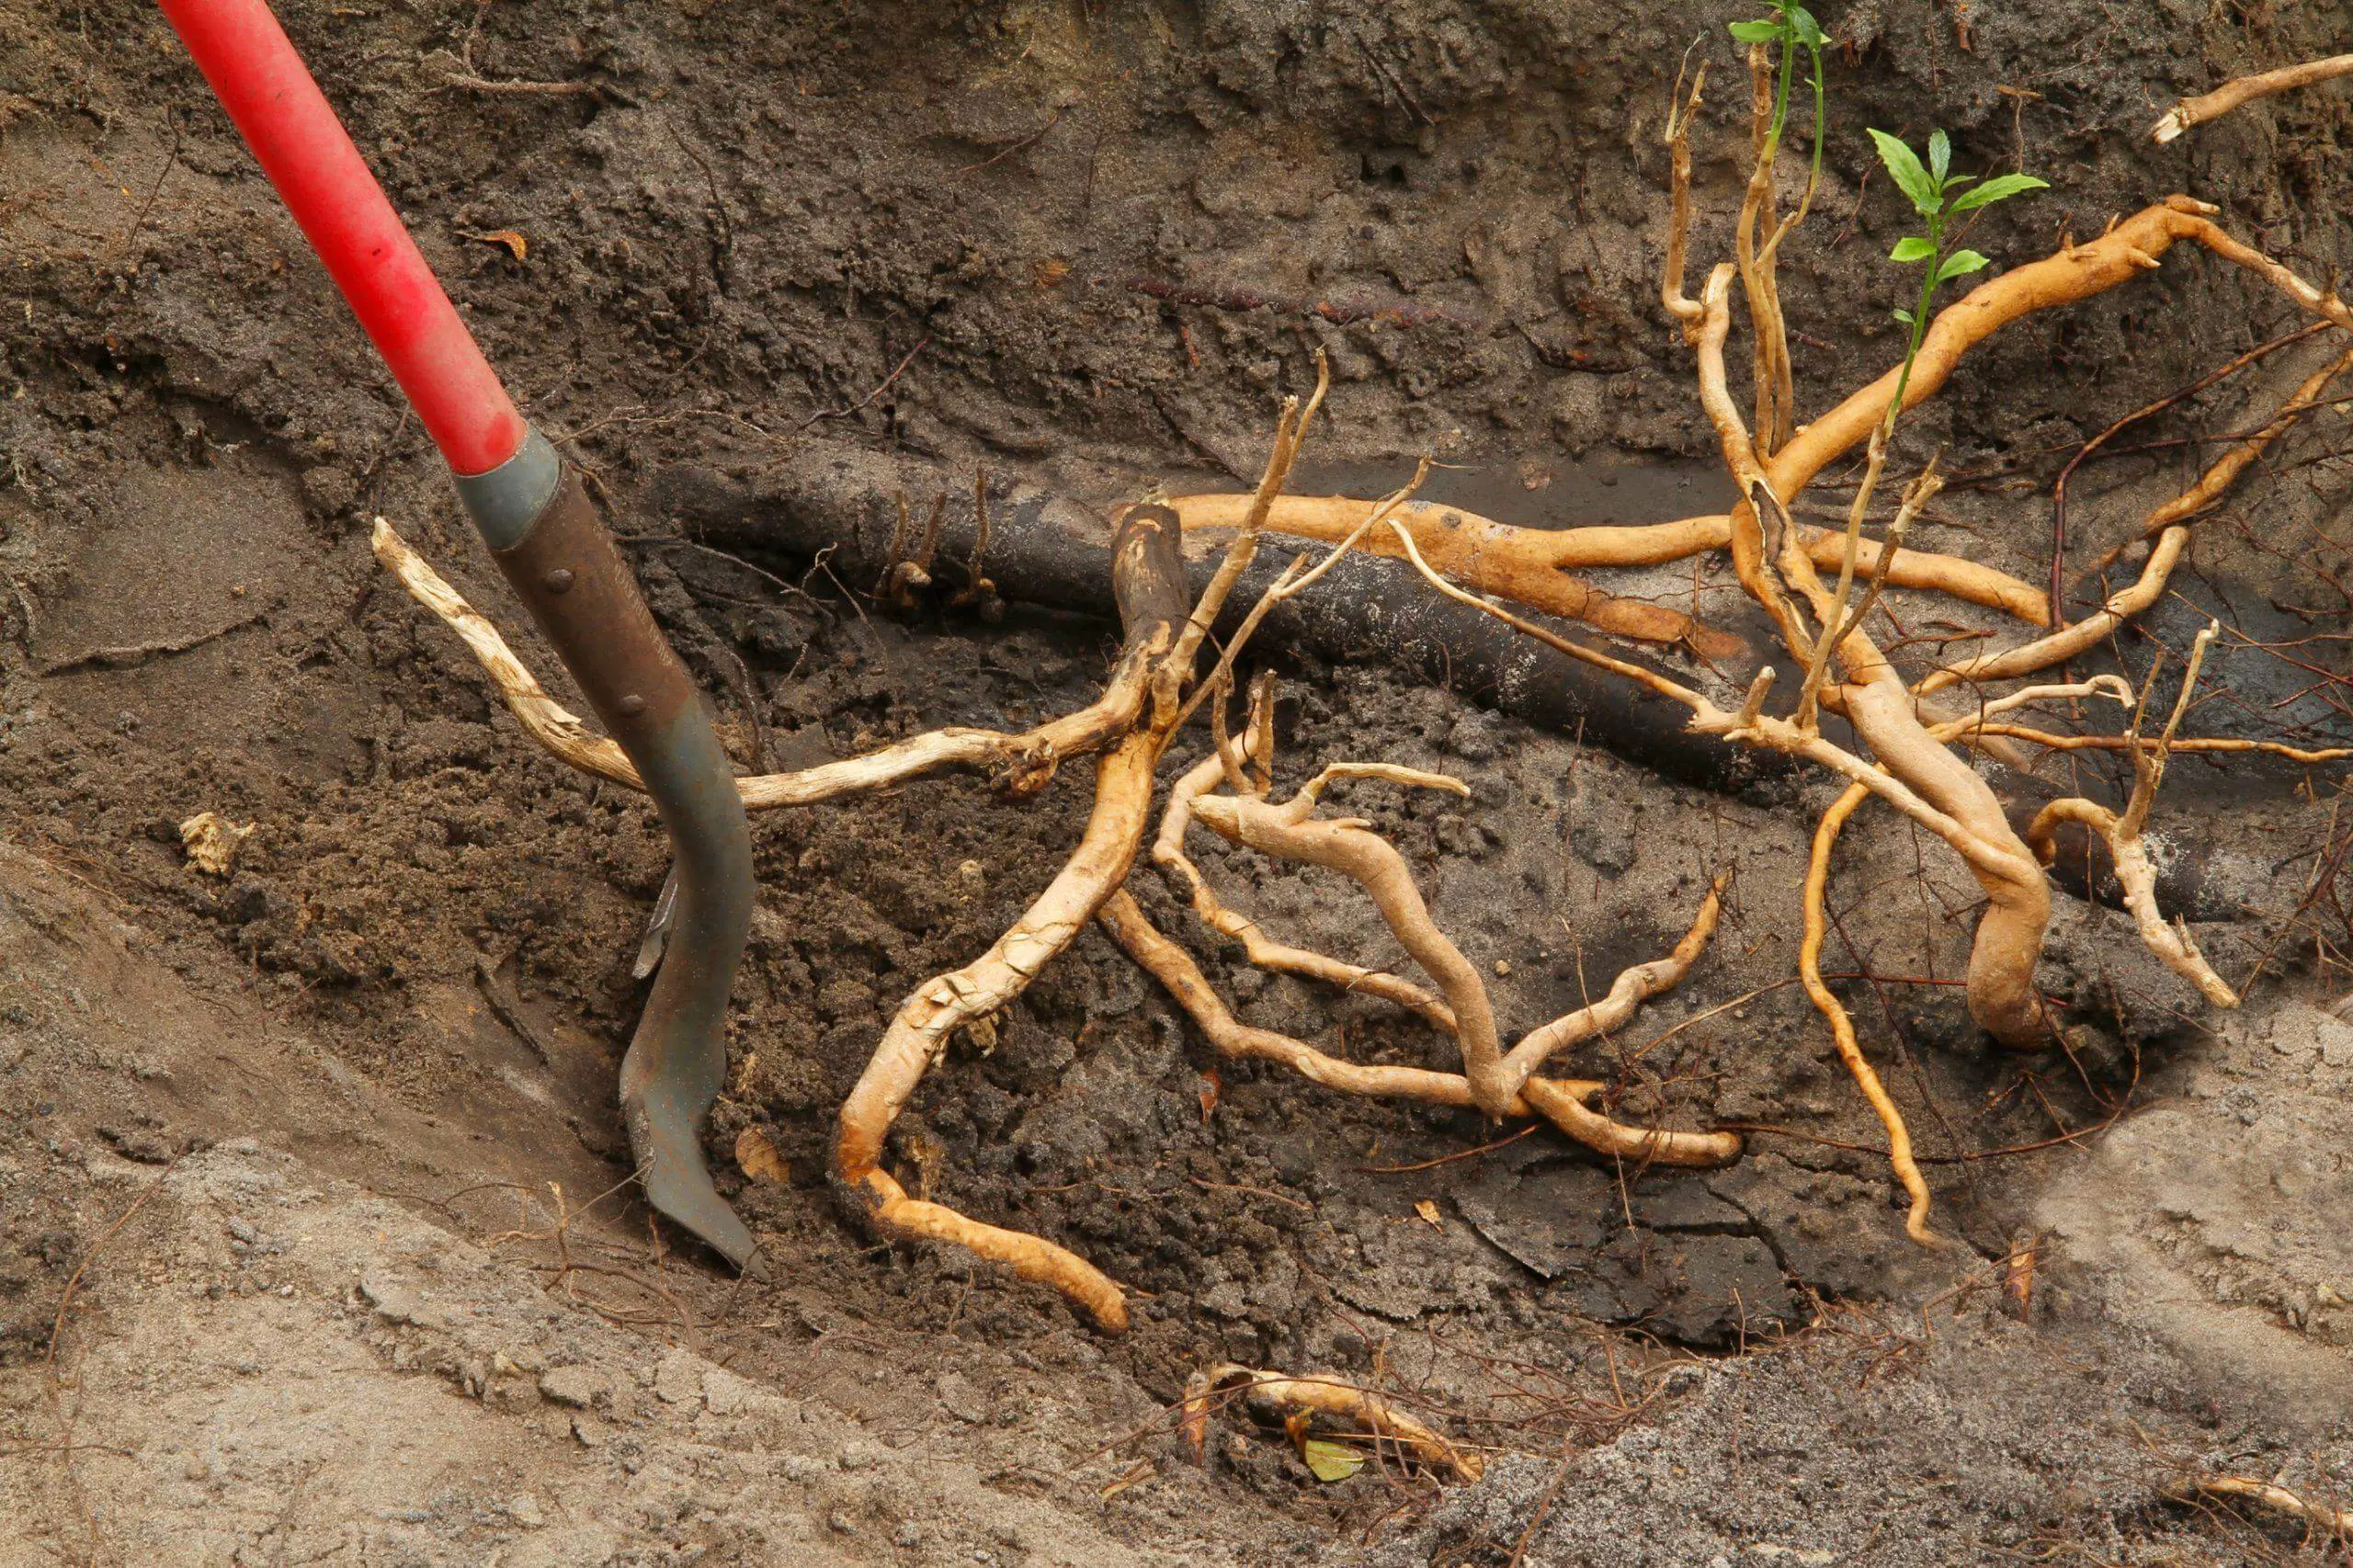 Digging invasive roots out of the garden